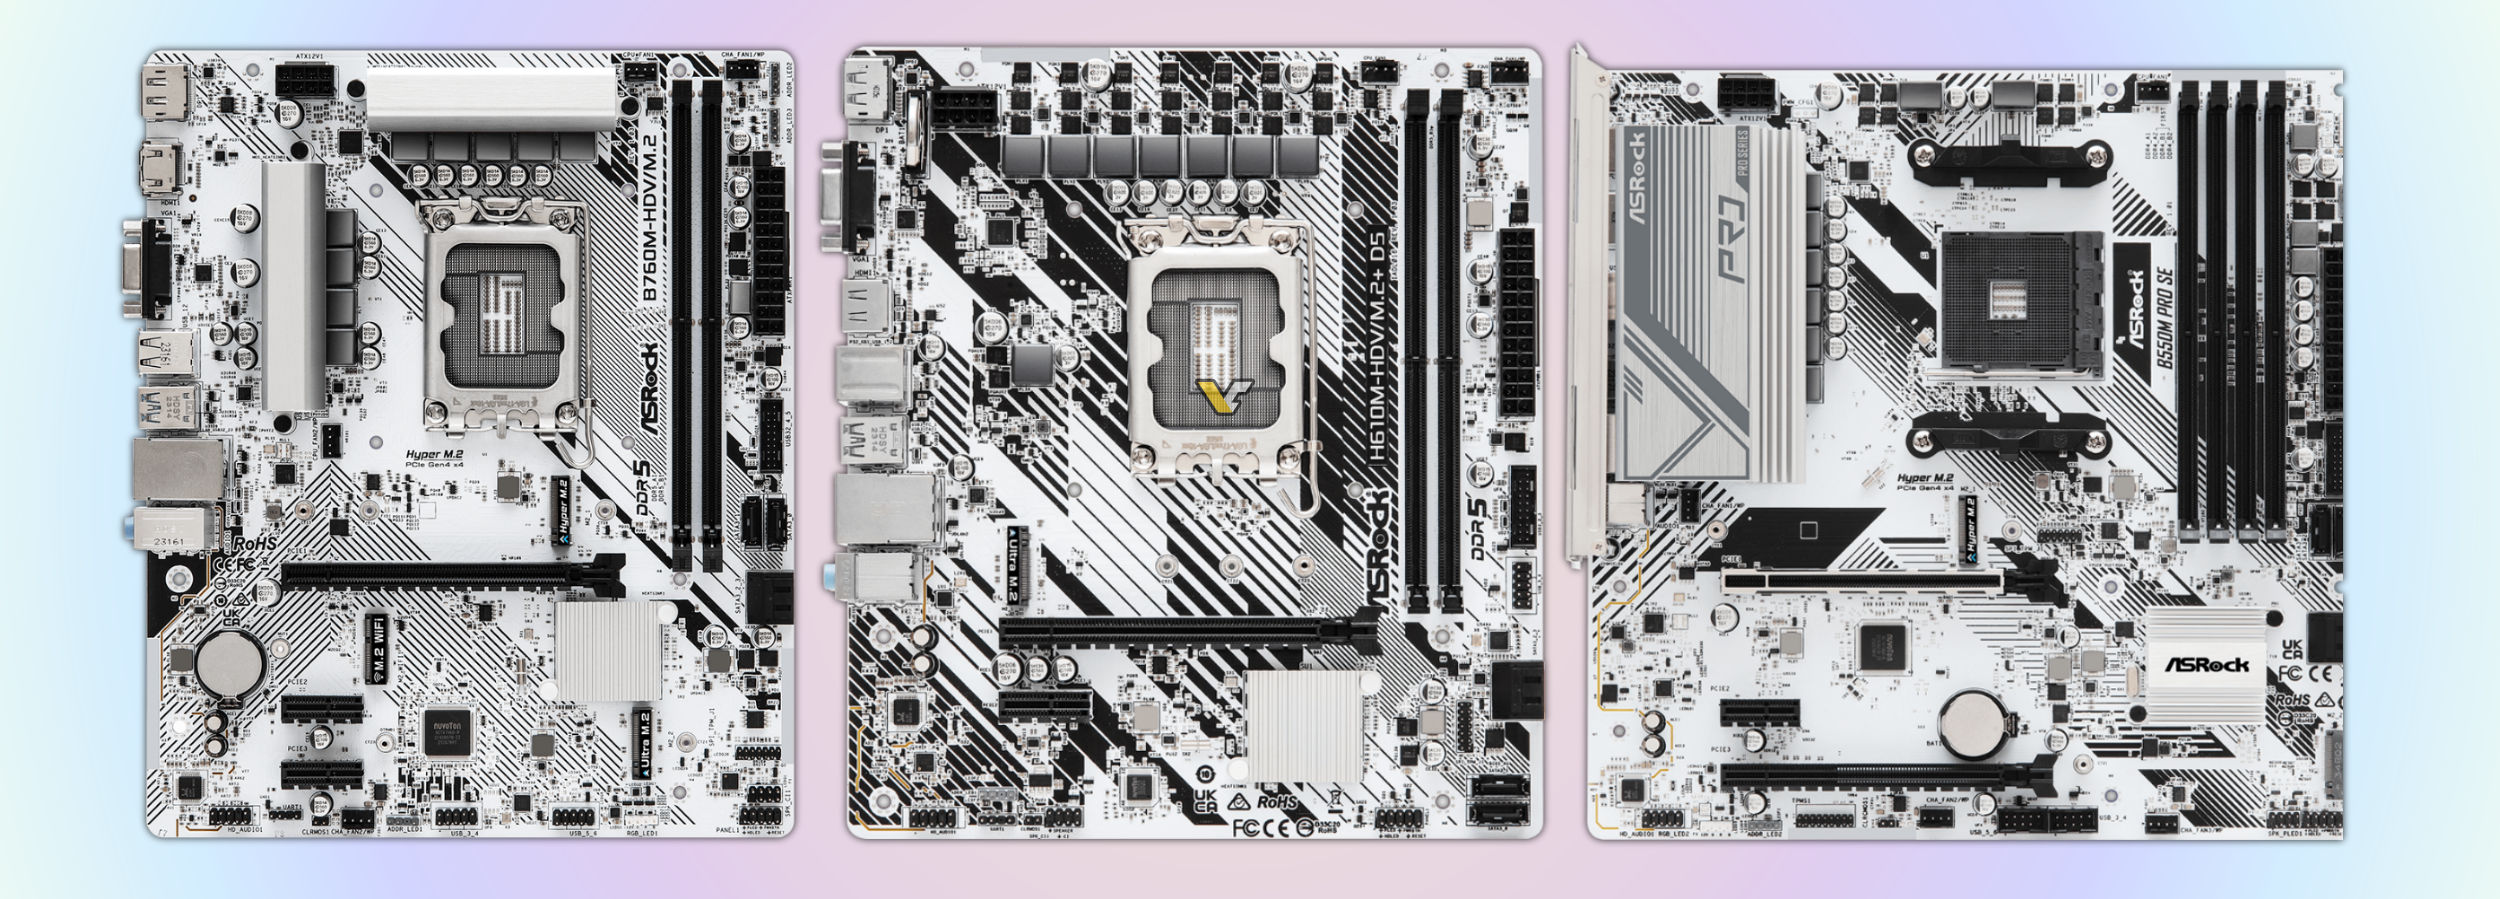 GIGABYTE Unveils Two Stylish White Motherboards, Supporting Intel